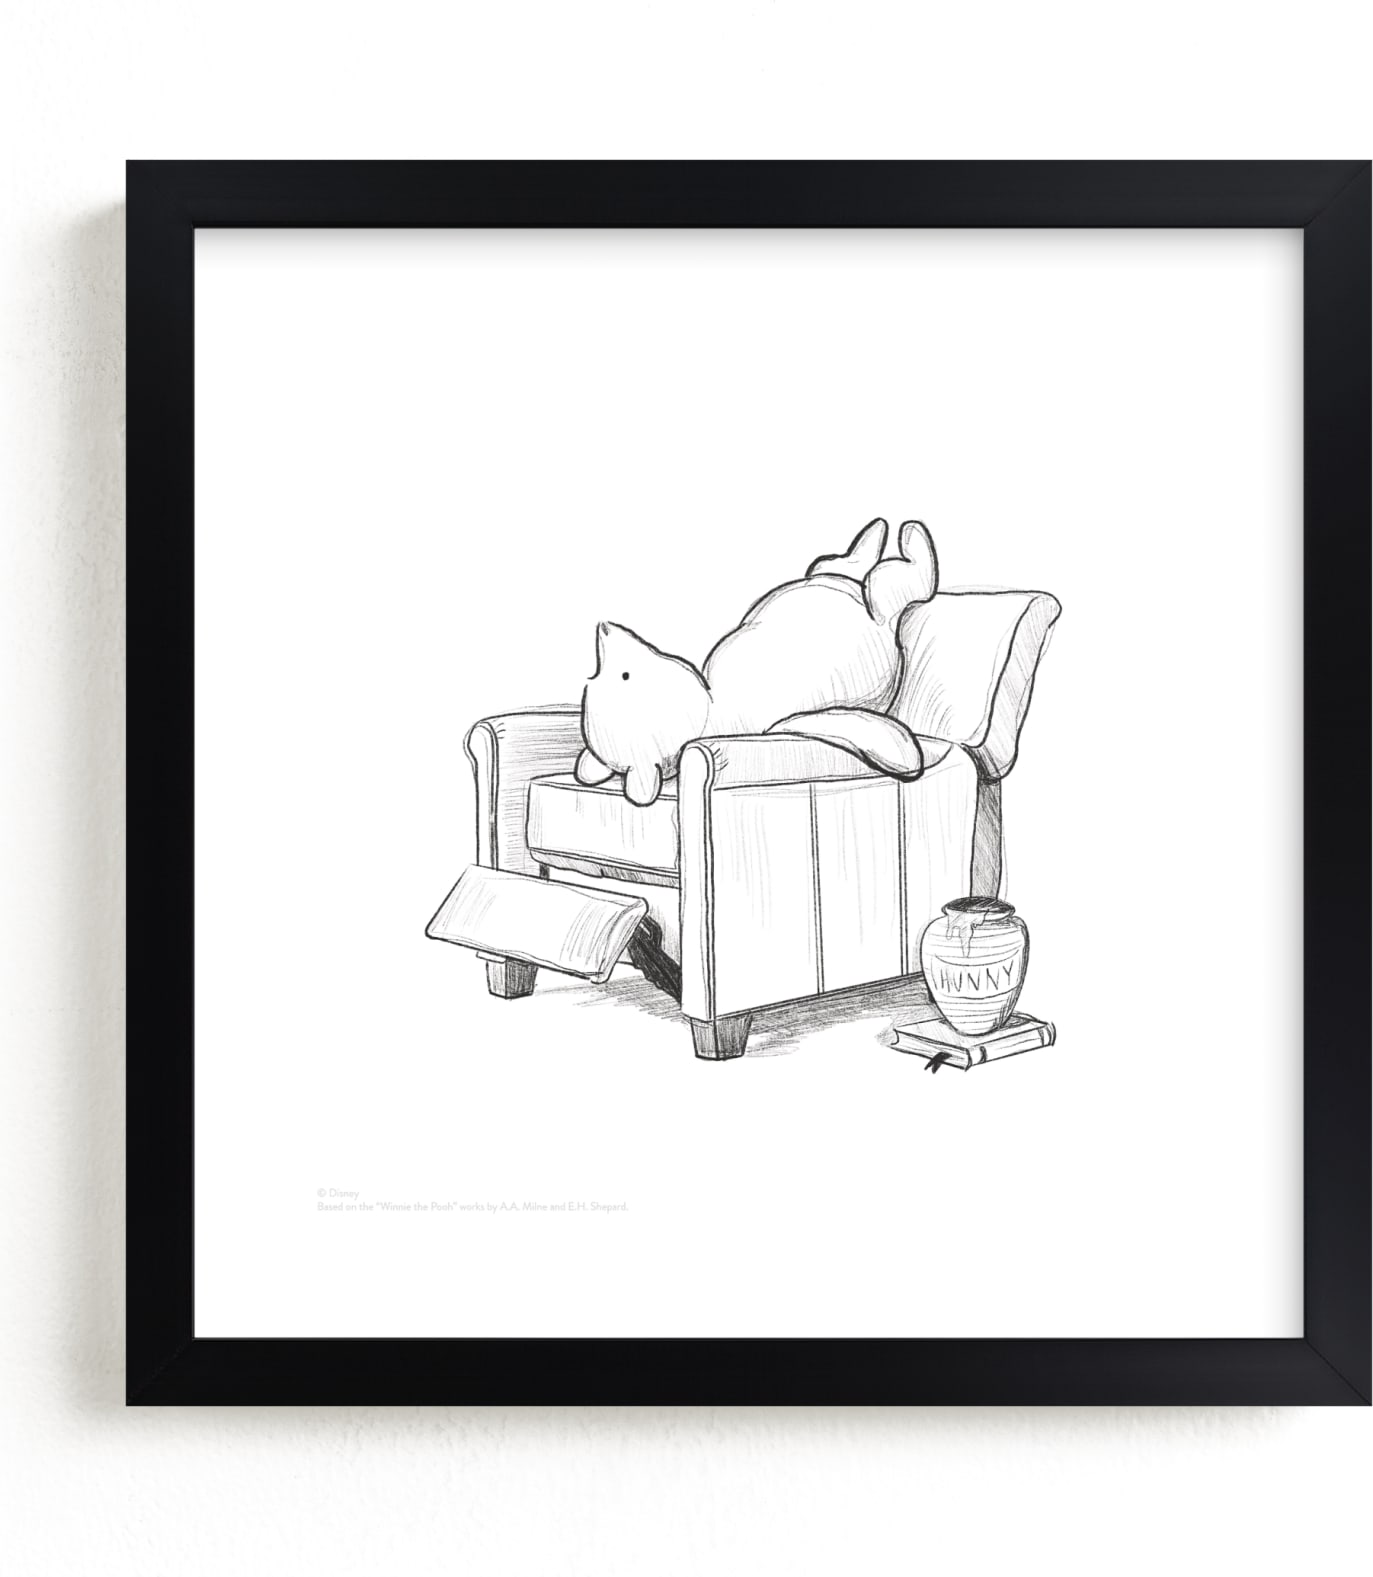 This is a black and white, white disney art by Stefanie Lane called Pooh Lounging from Disney's Winnie The Pooh.